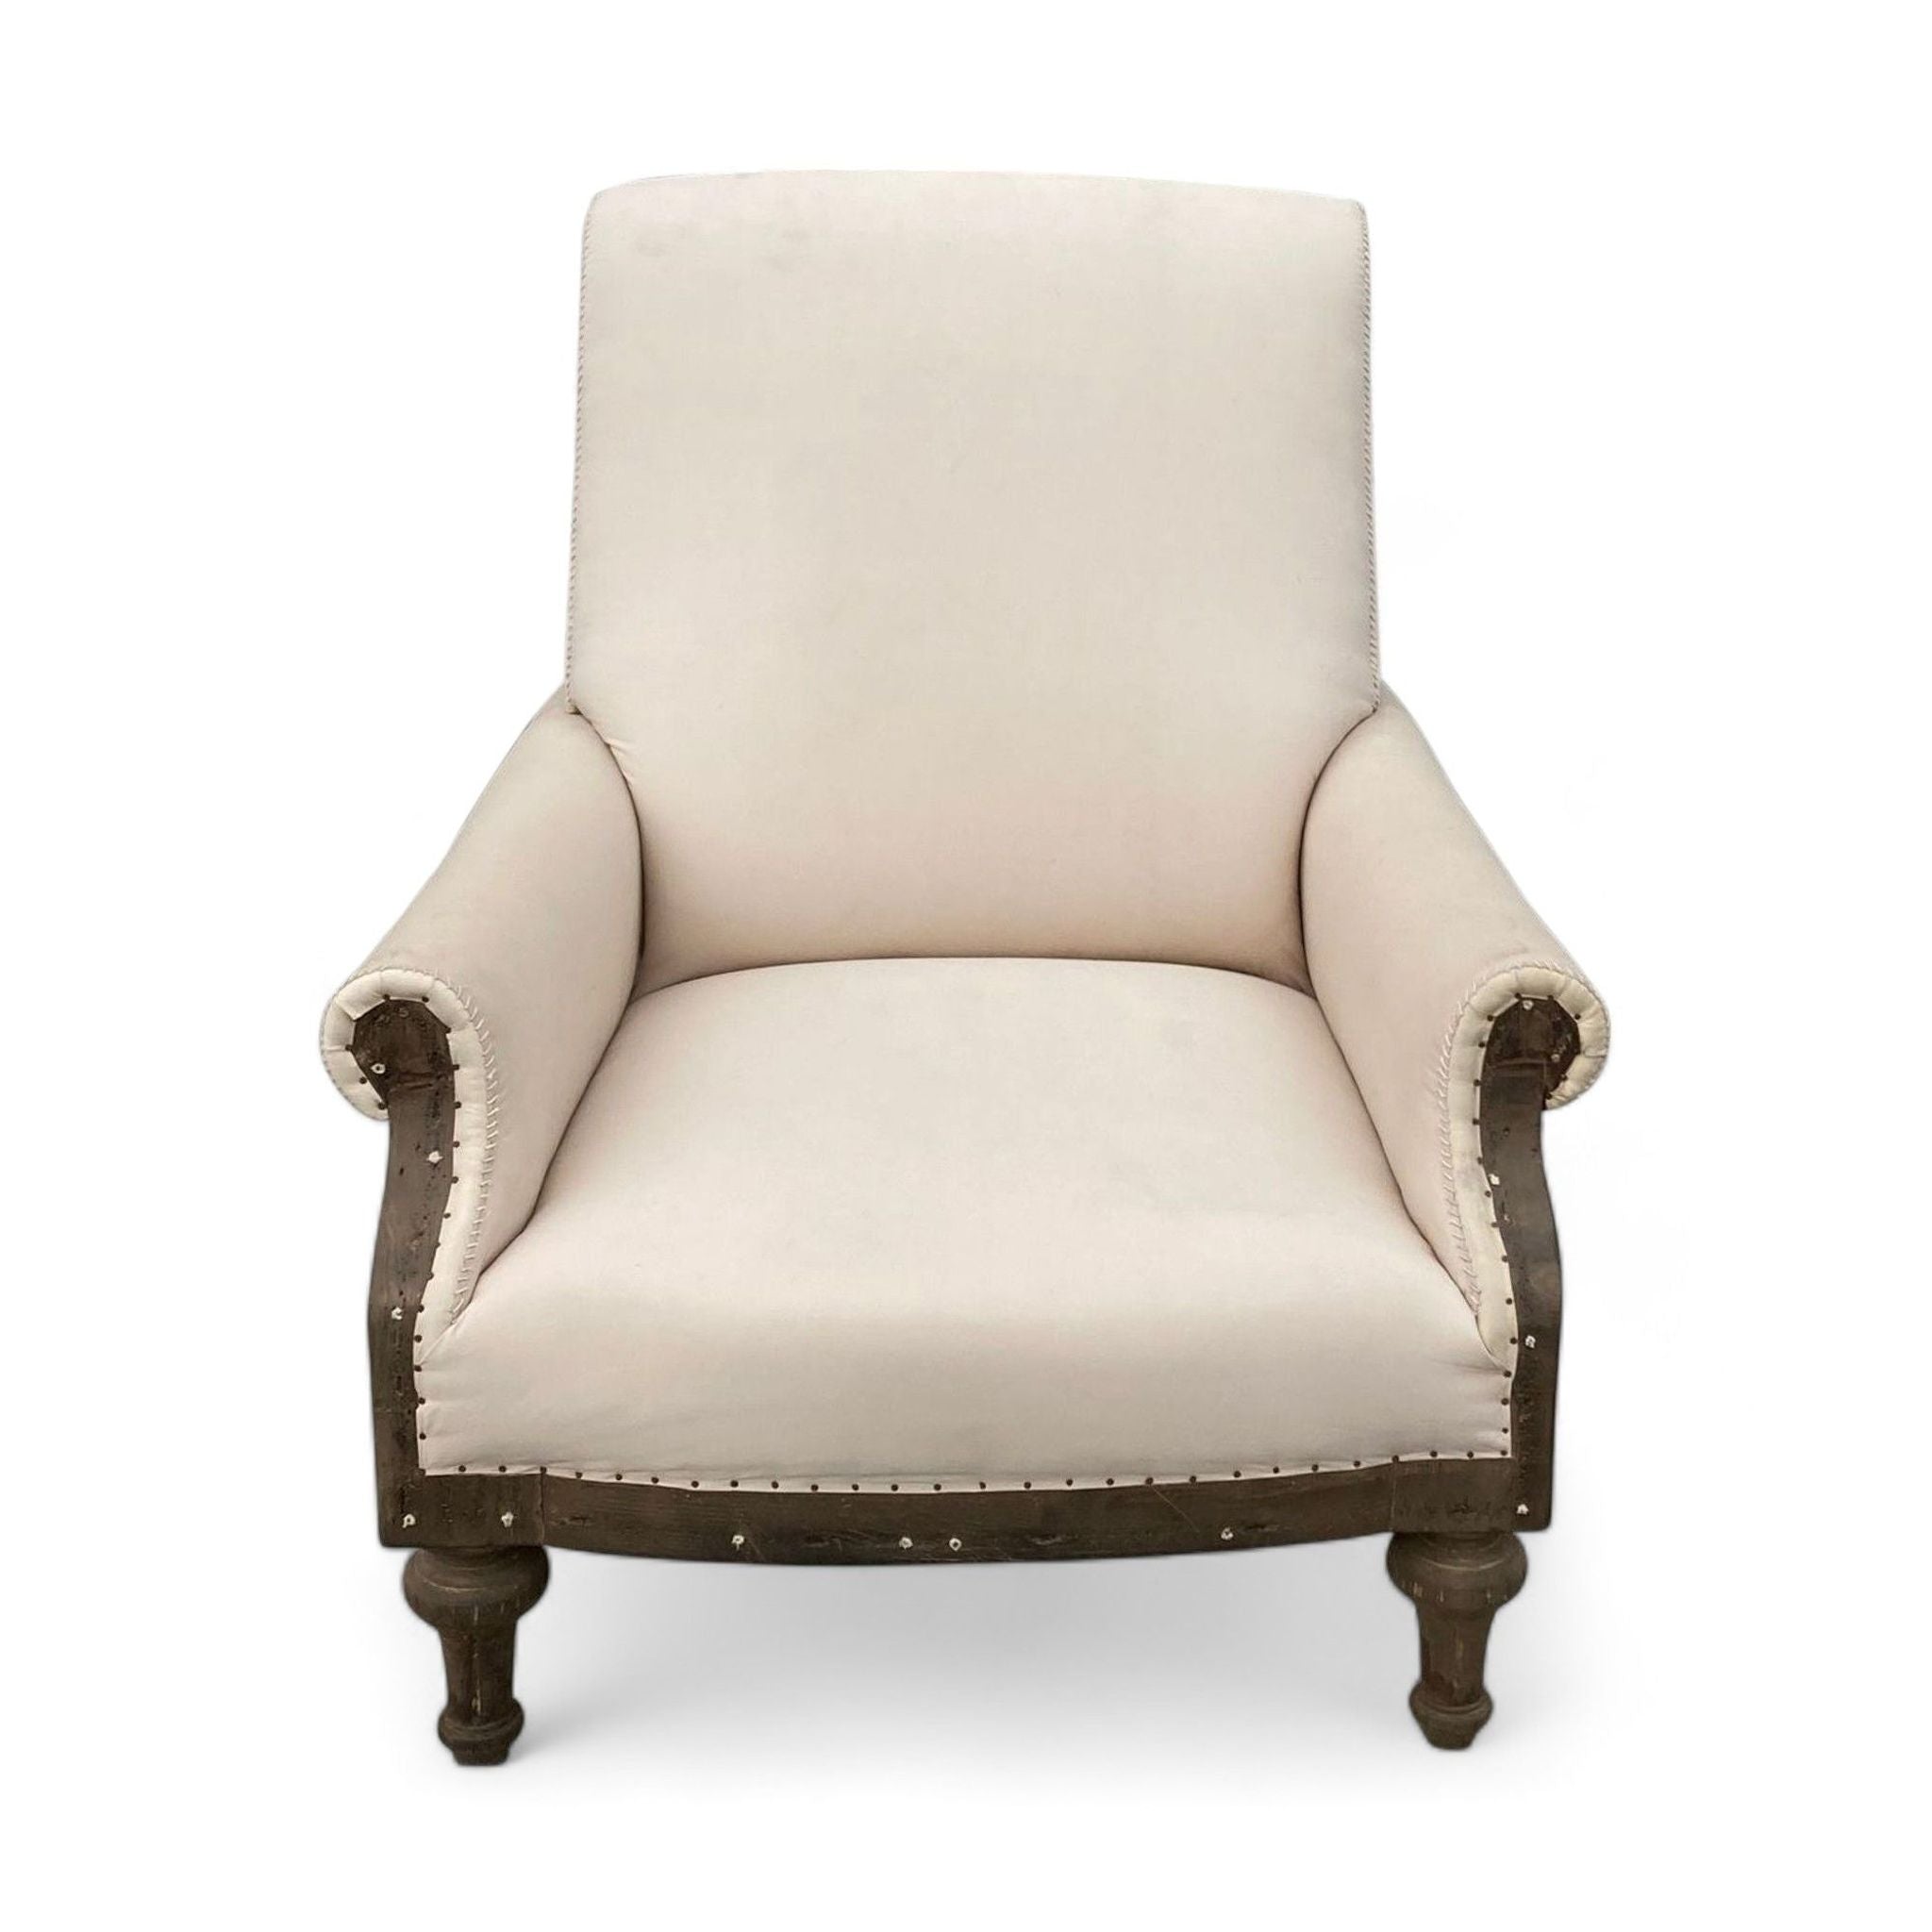 1. Restoration Hardware's 19th-century inspired club chair with exposed wooden frame and cream velvet upholstery.